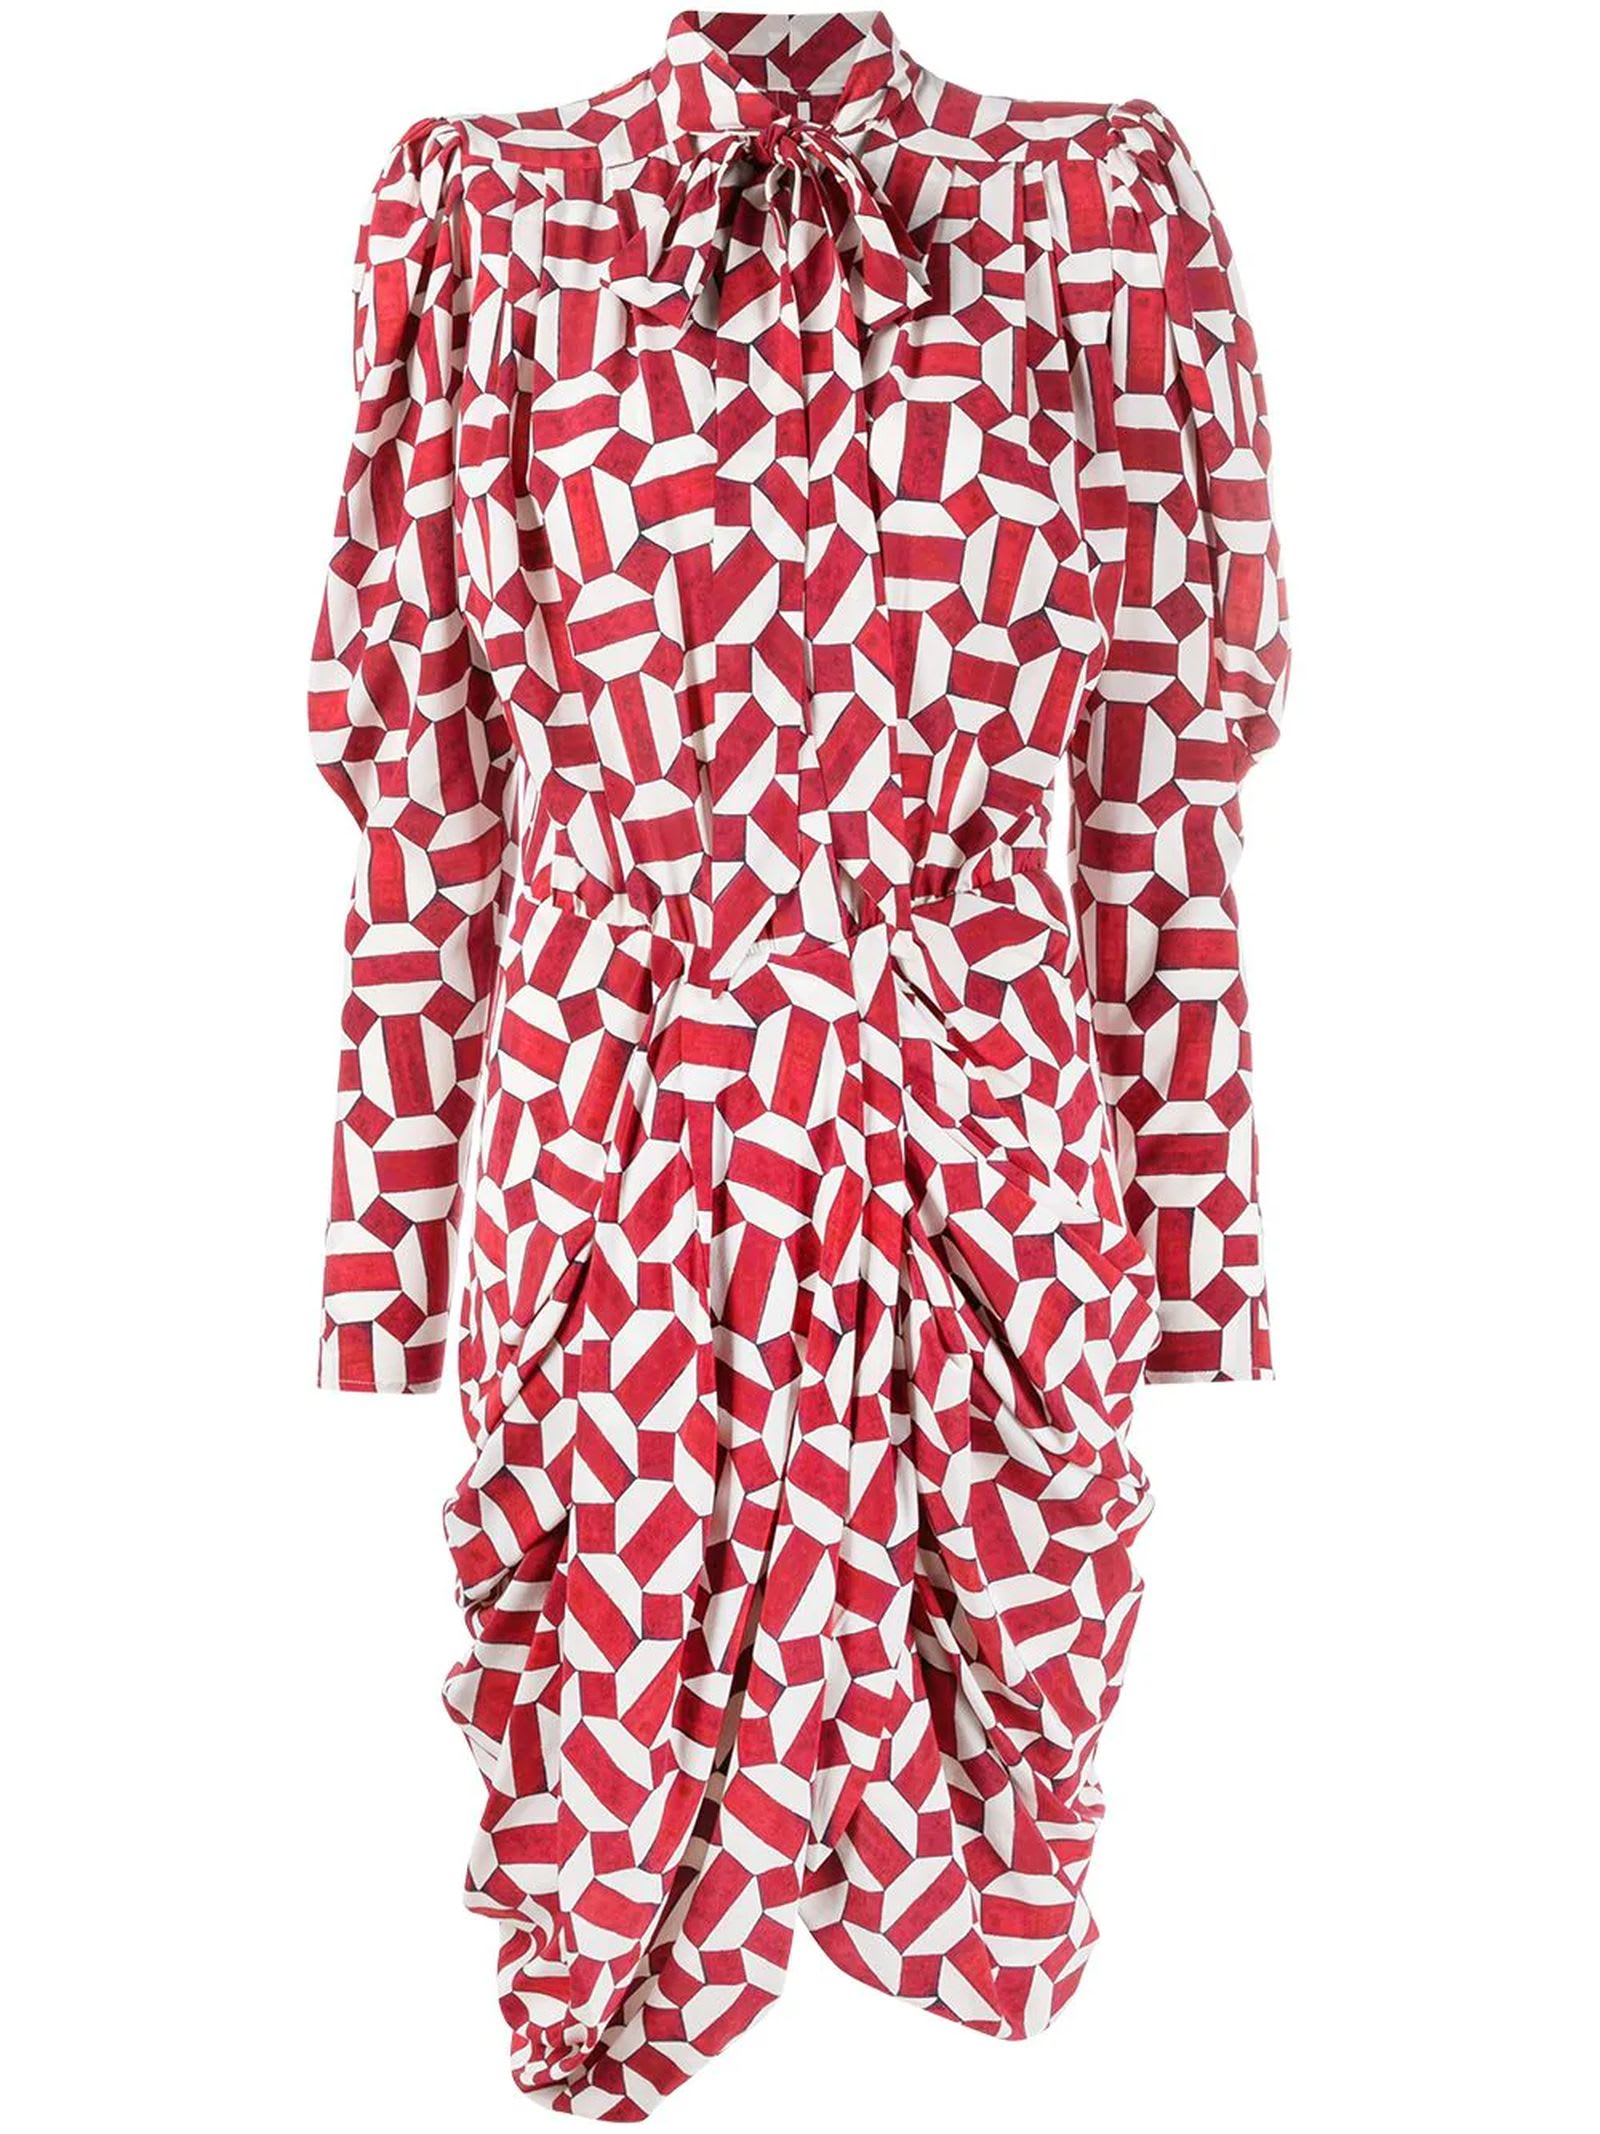 Isabel Marant Red And White Silk Dress